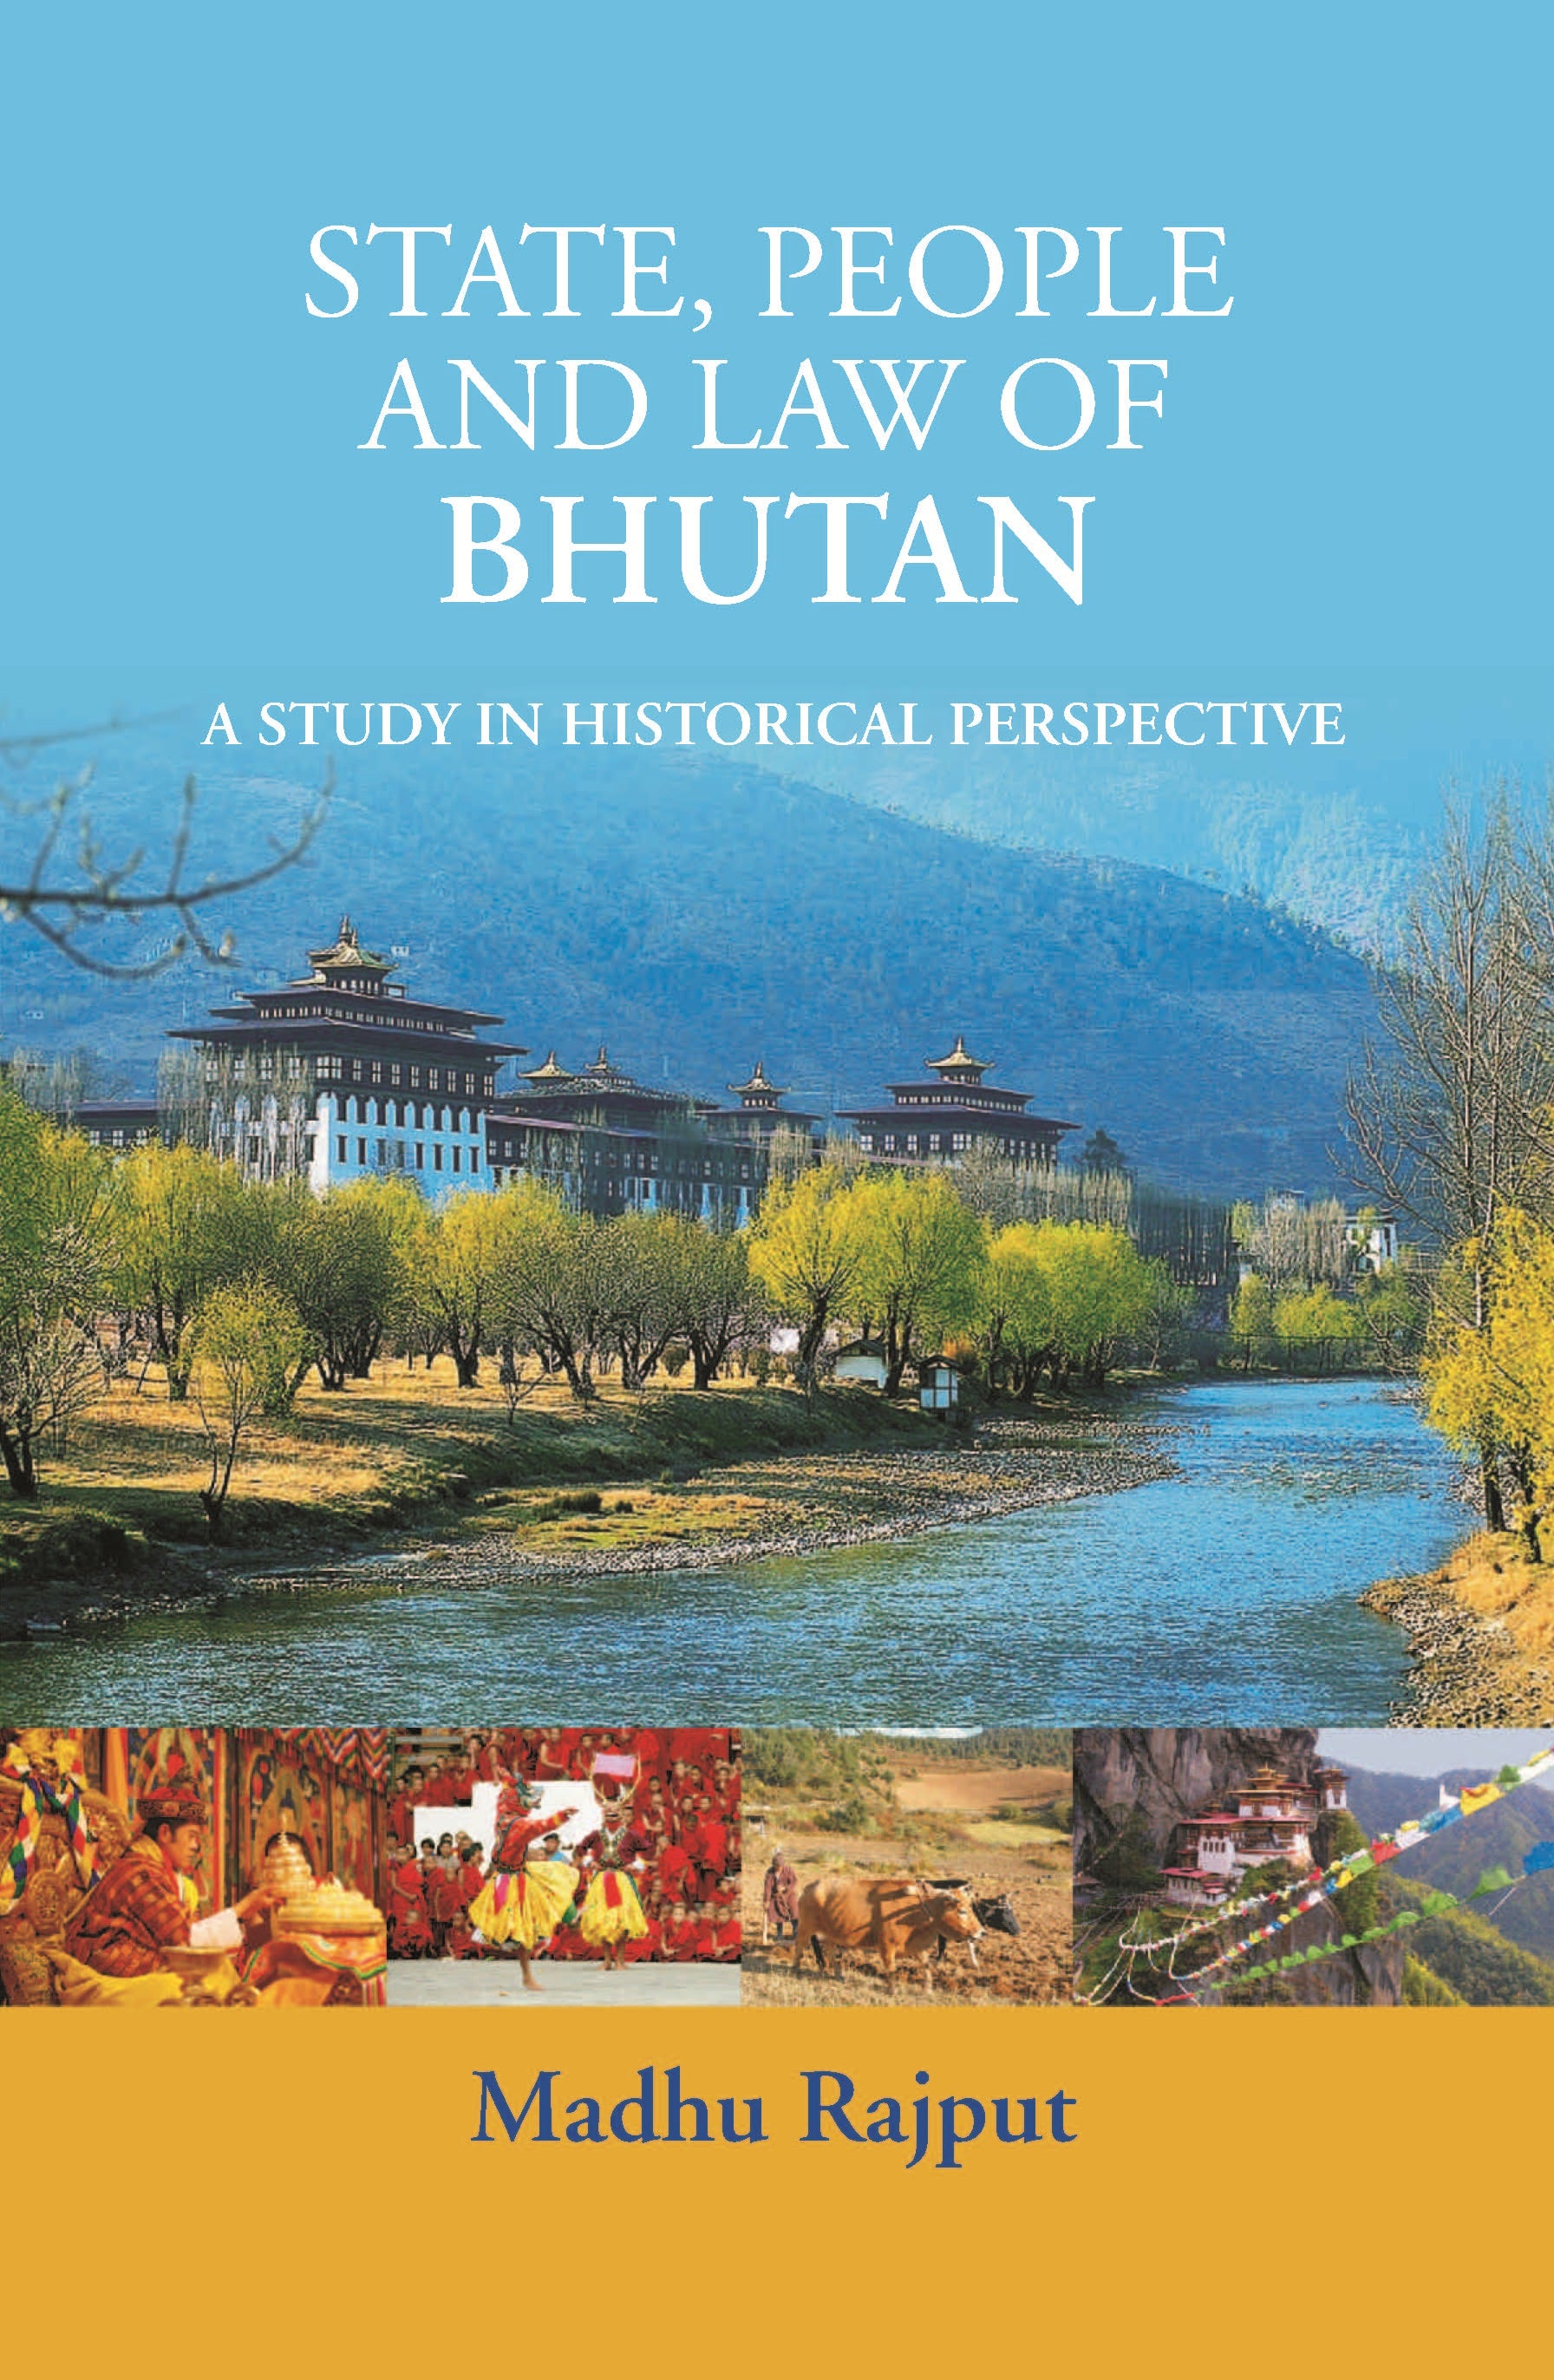 State, People Law of Bhutan